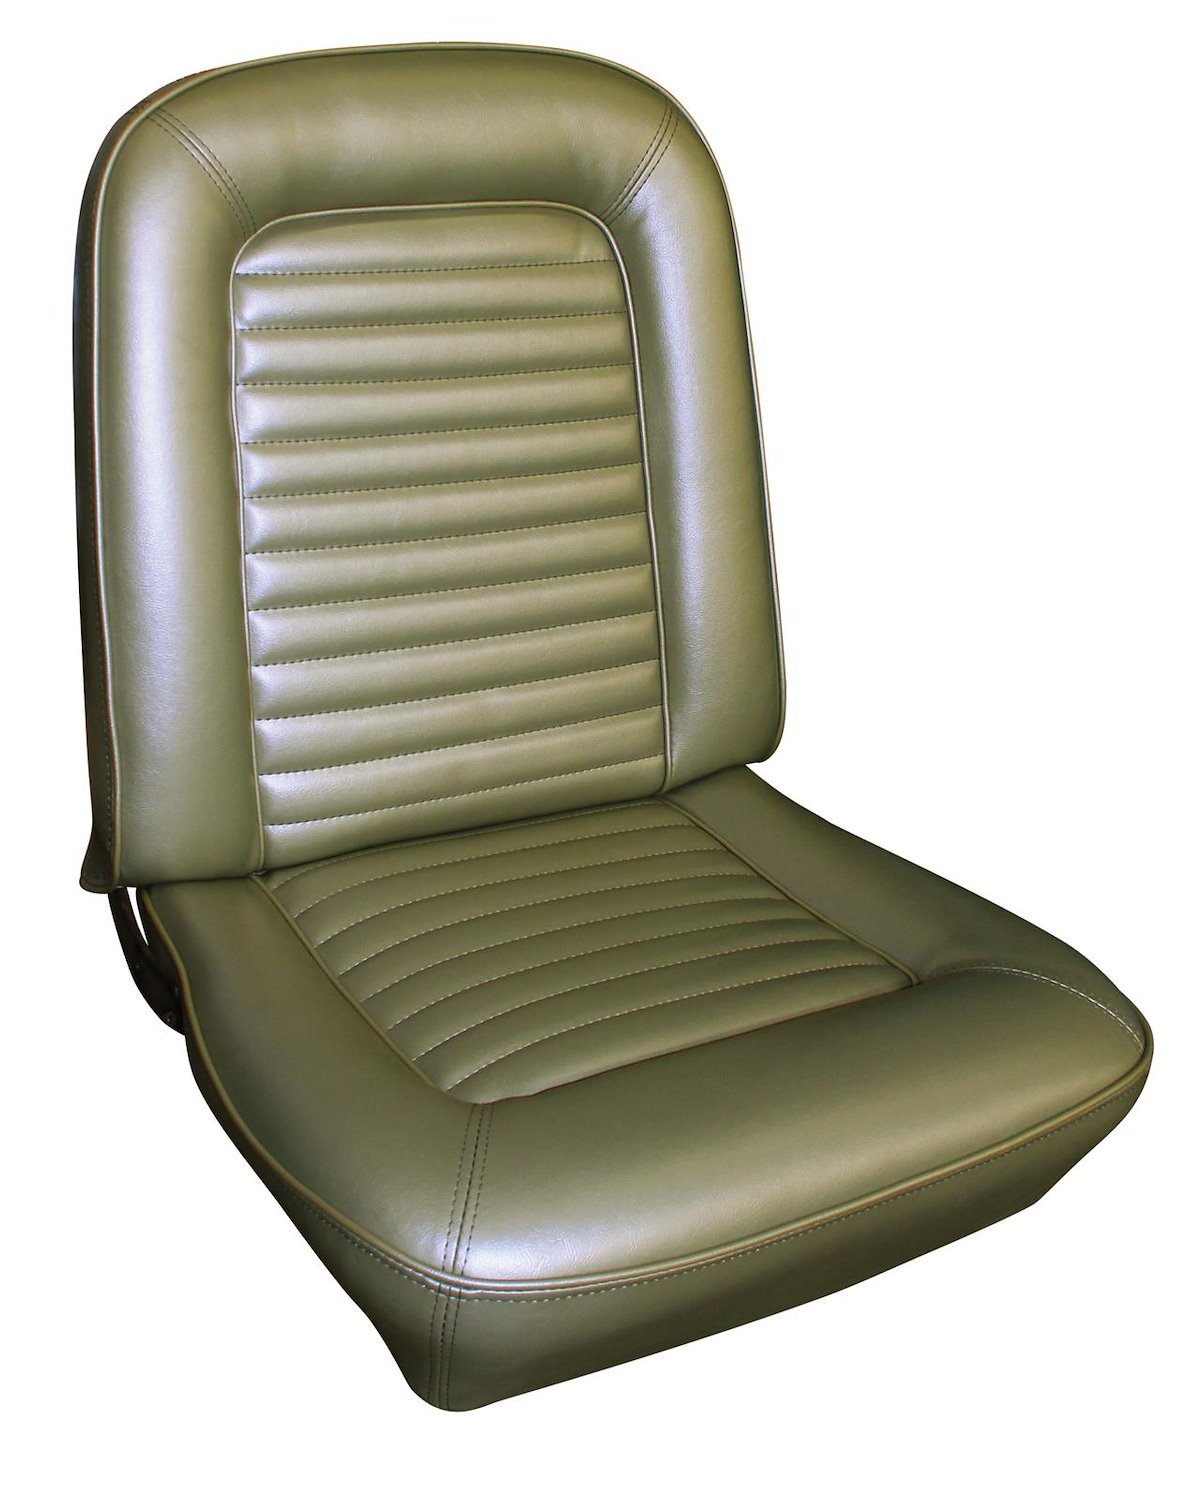 1968 Ford Mustang Fastback Deluxe Interior Front Bench Seat Upholstery Set